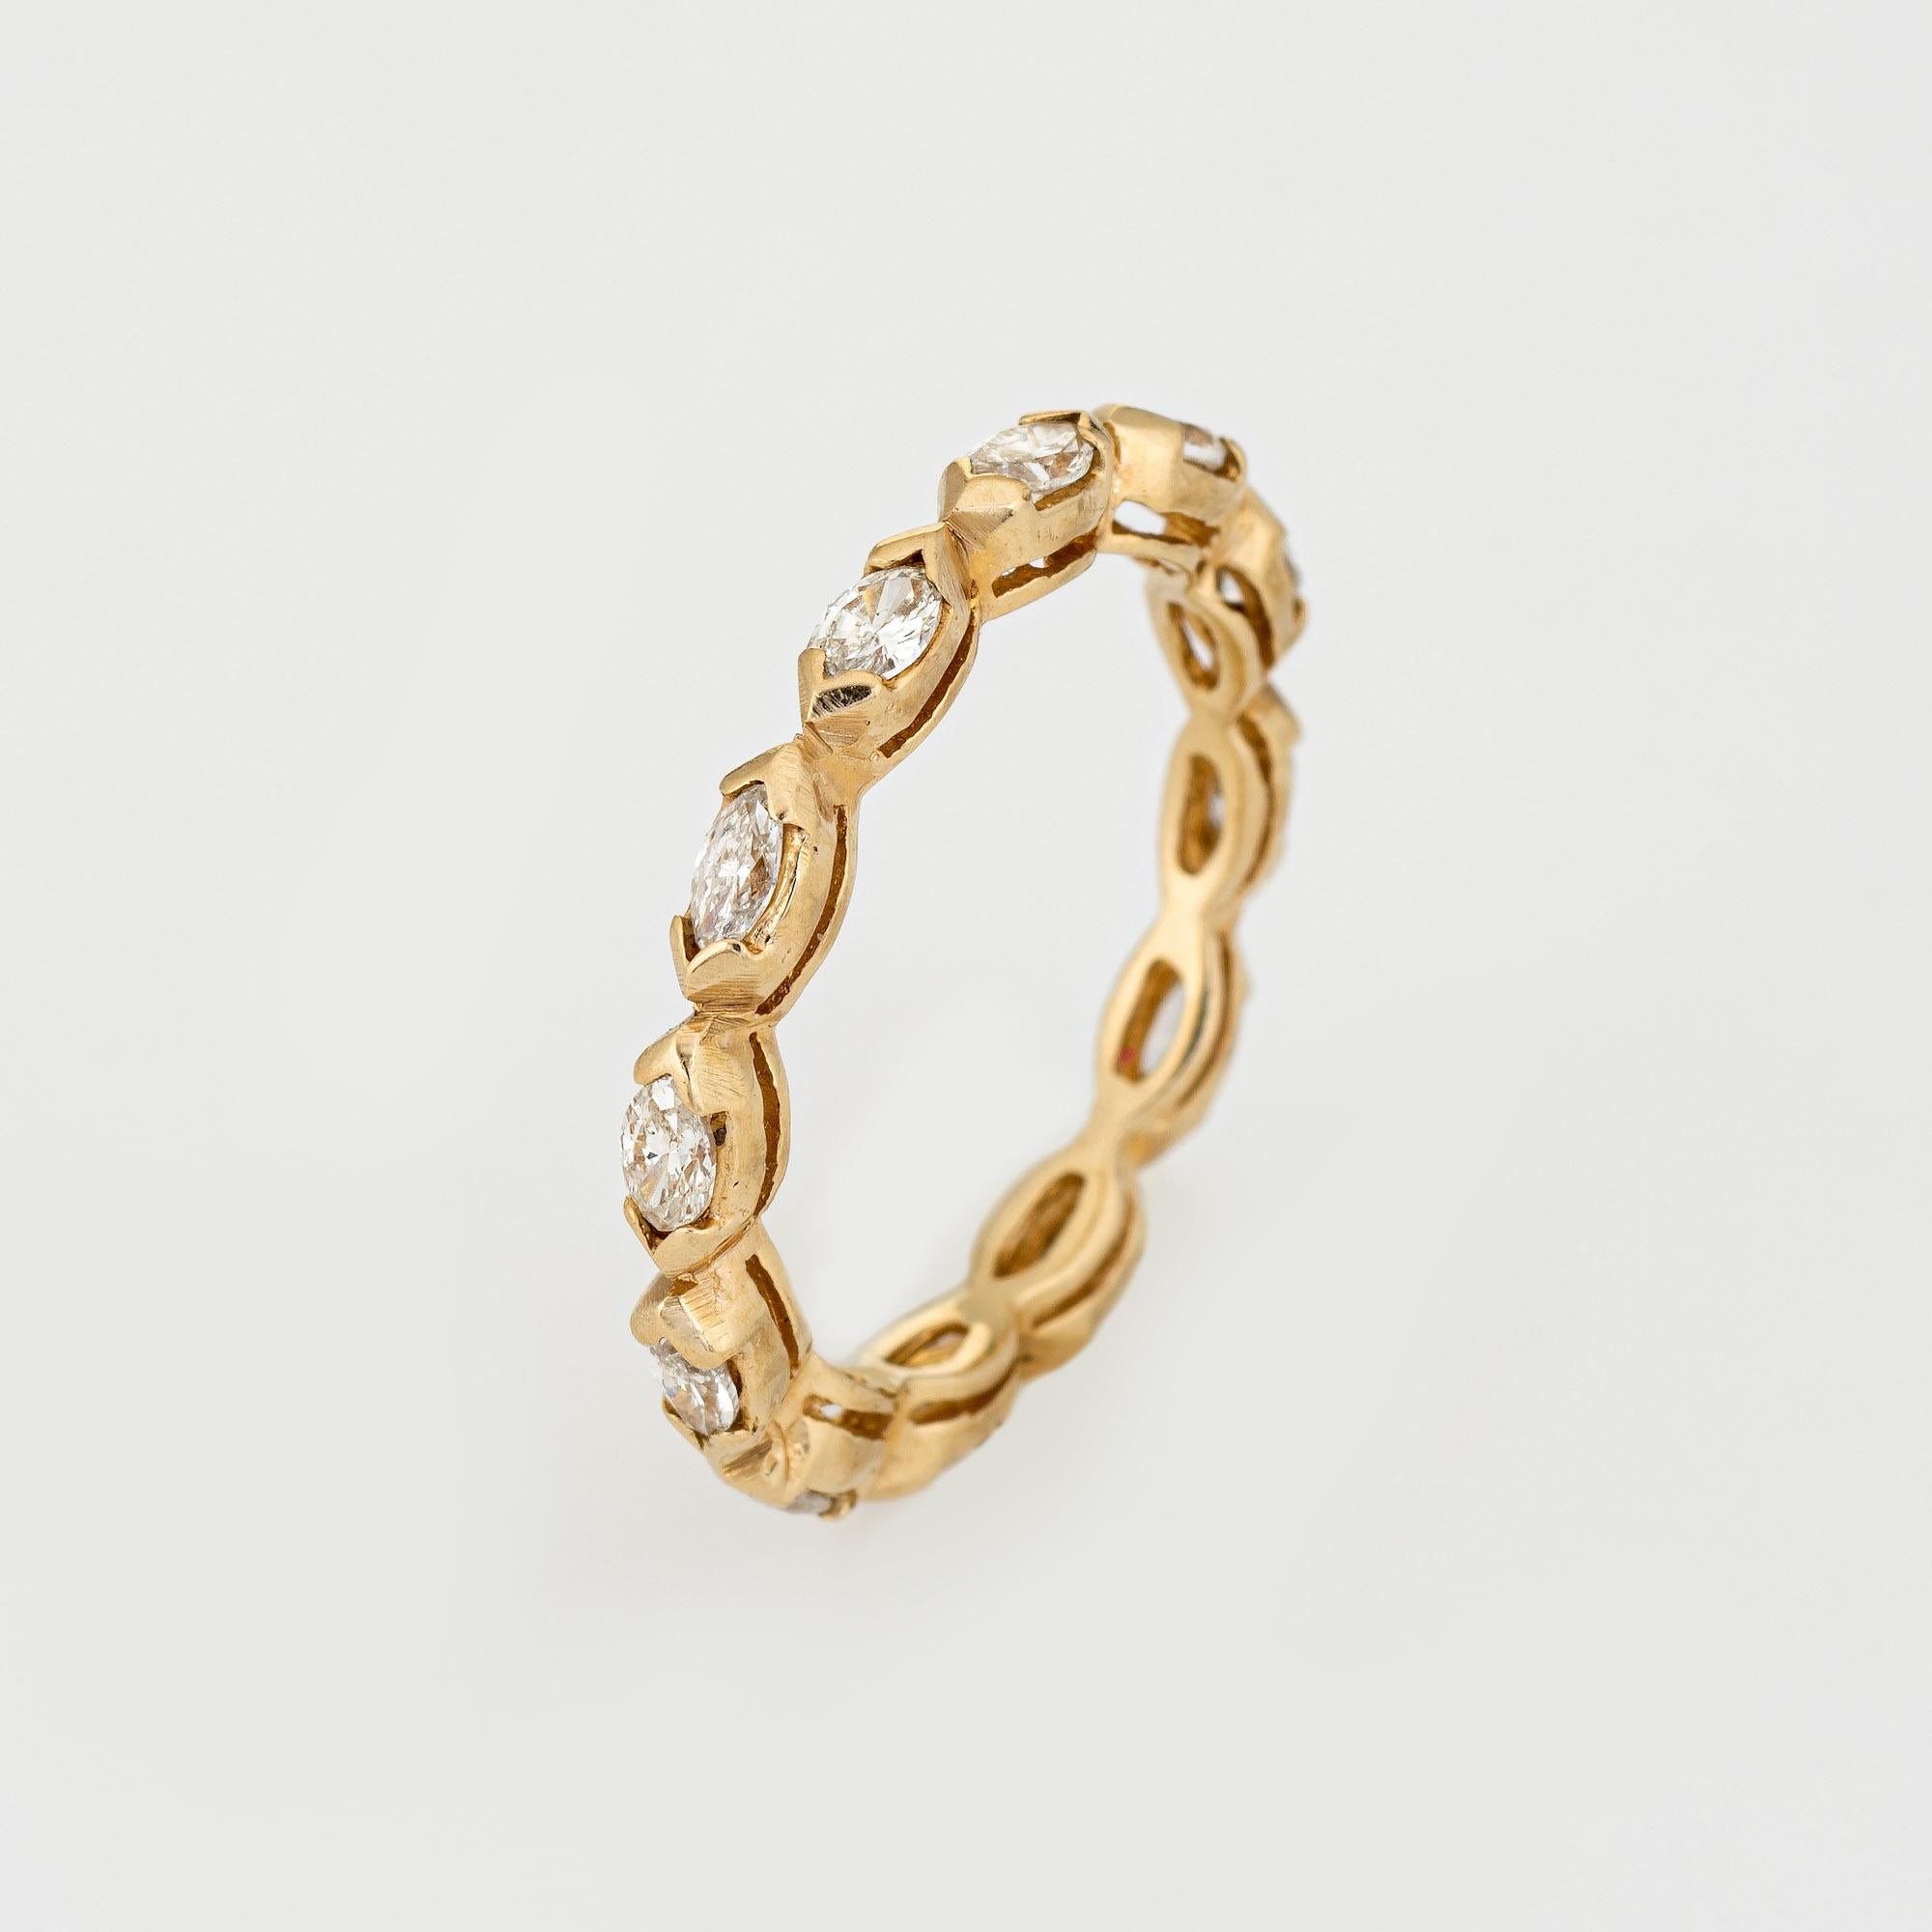 Stylish vintage diamond eternity ring (circa 1990s) crafted in 14 karat yellow gold. 

12 marquise cut diamonds total an estimated 1 carat (estimated at H-I color and VS2-SI2 clarity). 

The eternity ring is set with marquise cut diamonds